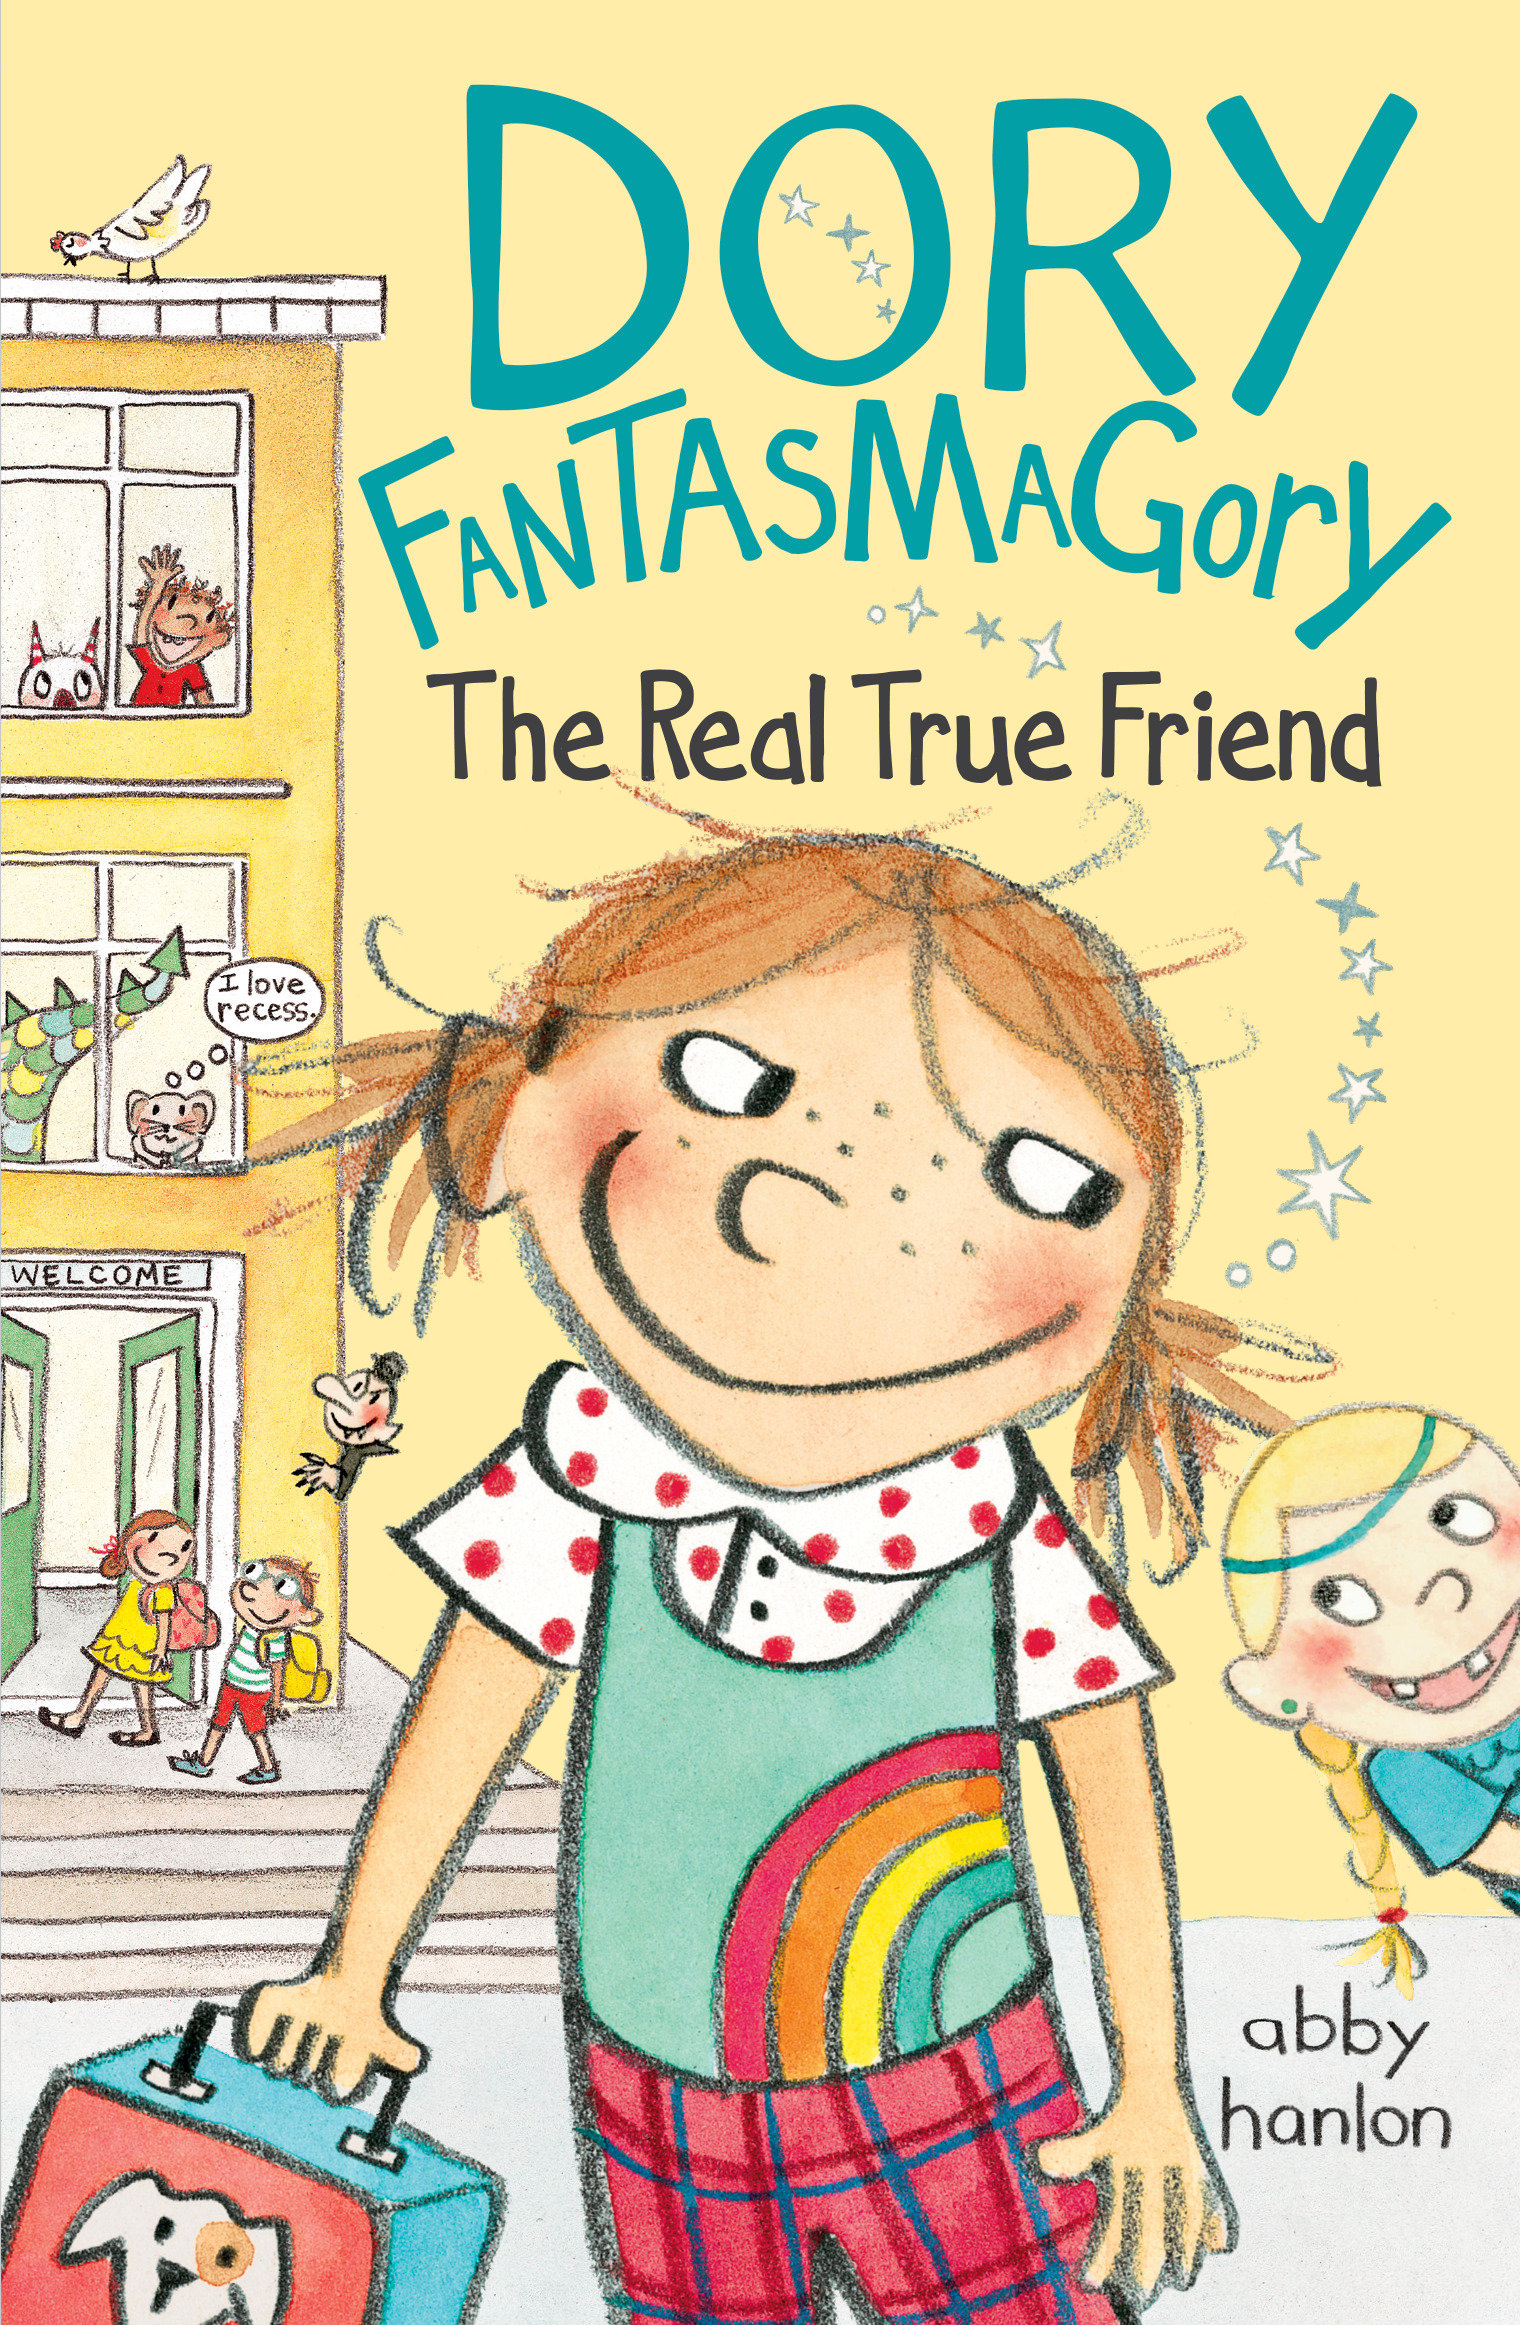 Dory Fantasmagory: The Real True Friend (Hardcover Book)